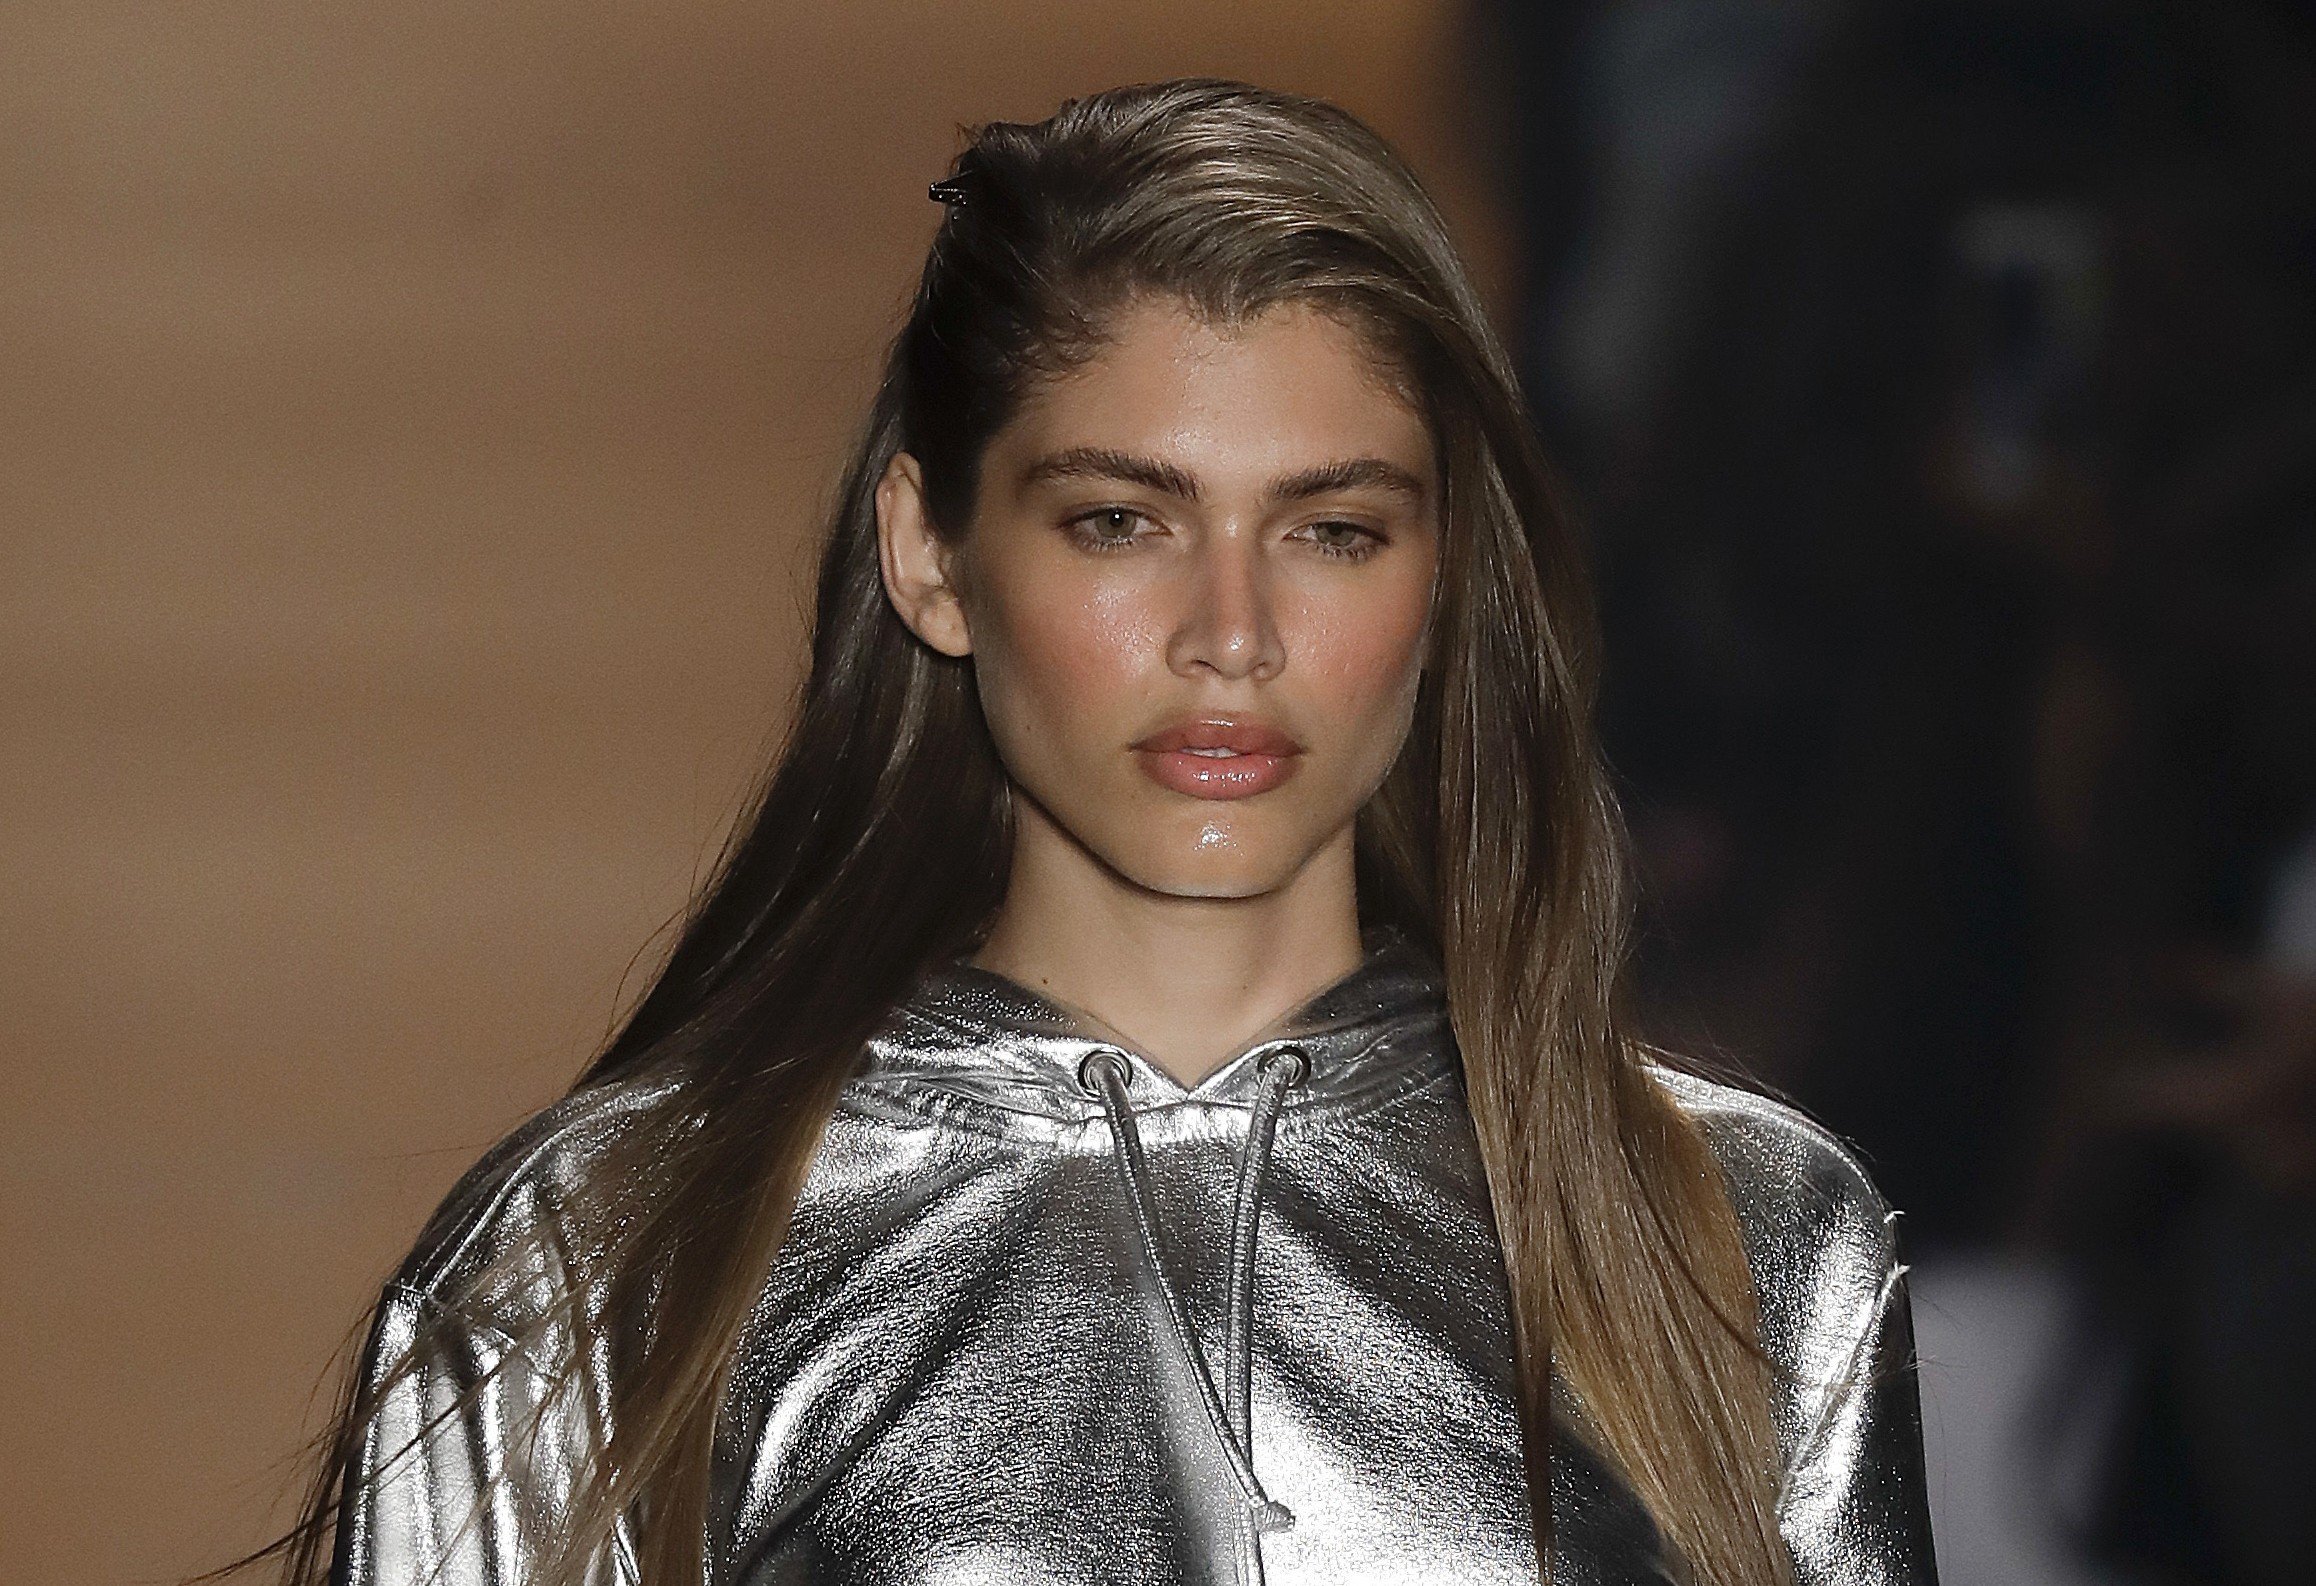 Victoria S Secret Hires First Transgender Model Valentina Sampaio In Wake Of Fashion Show Outrage South China Morning Post